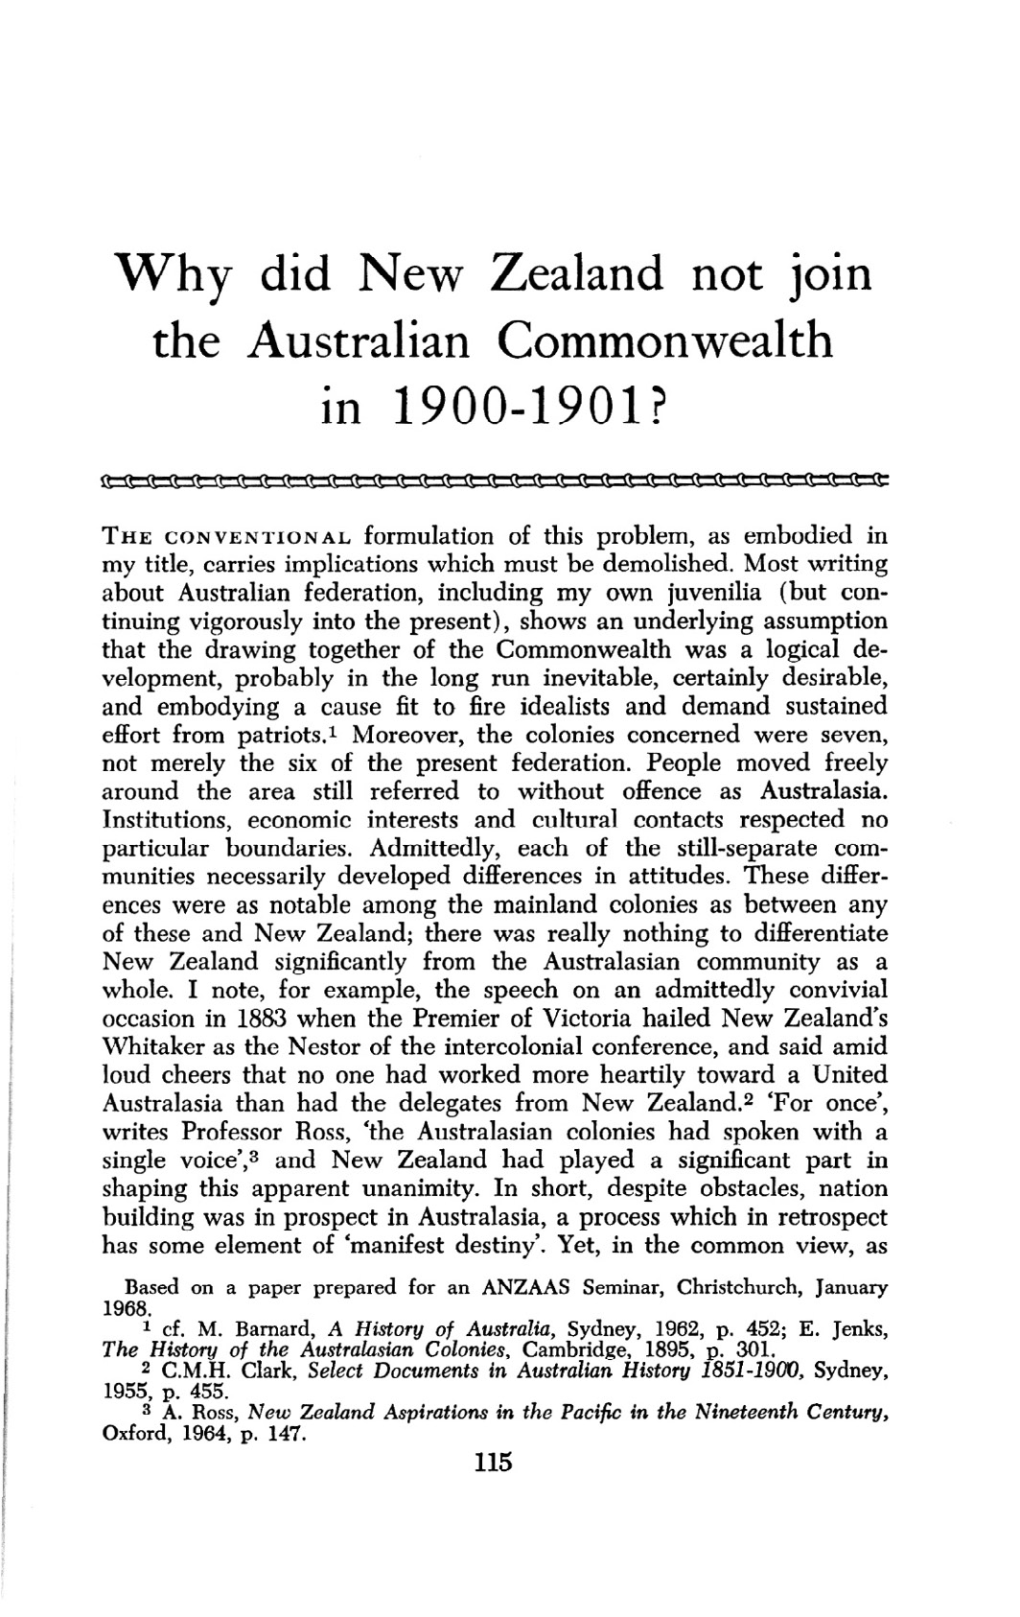 Why Did New Zealand Not Join the Australian Commonwealth in 1900-1901?